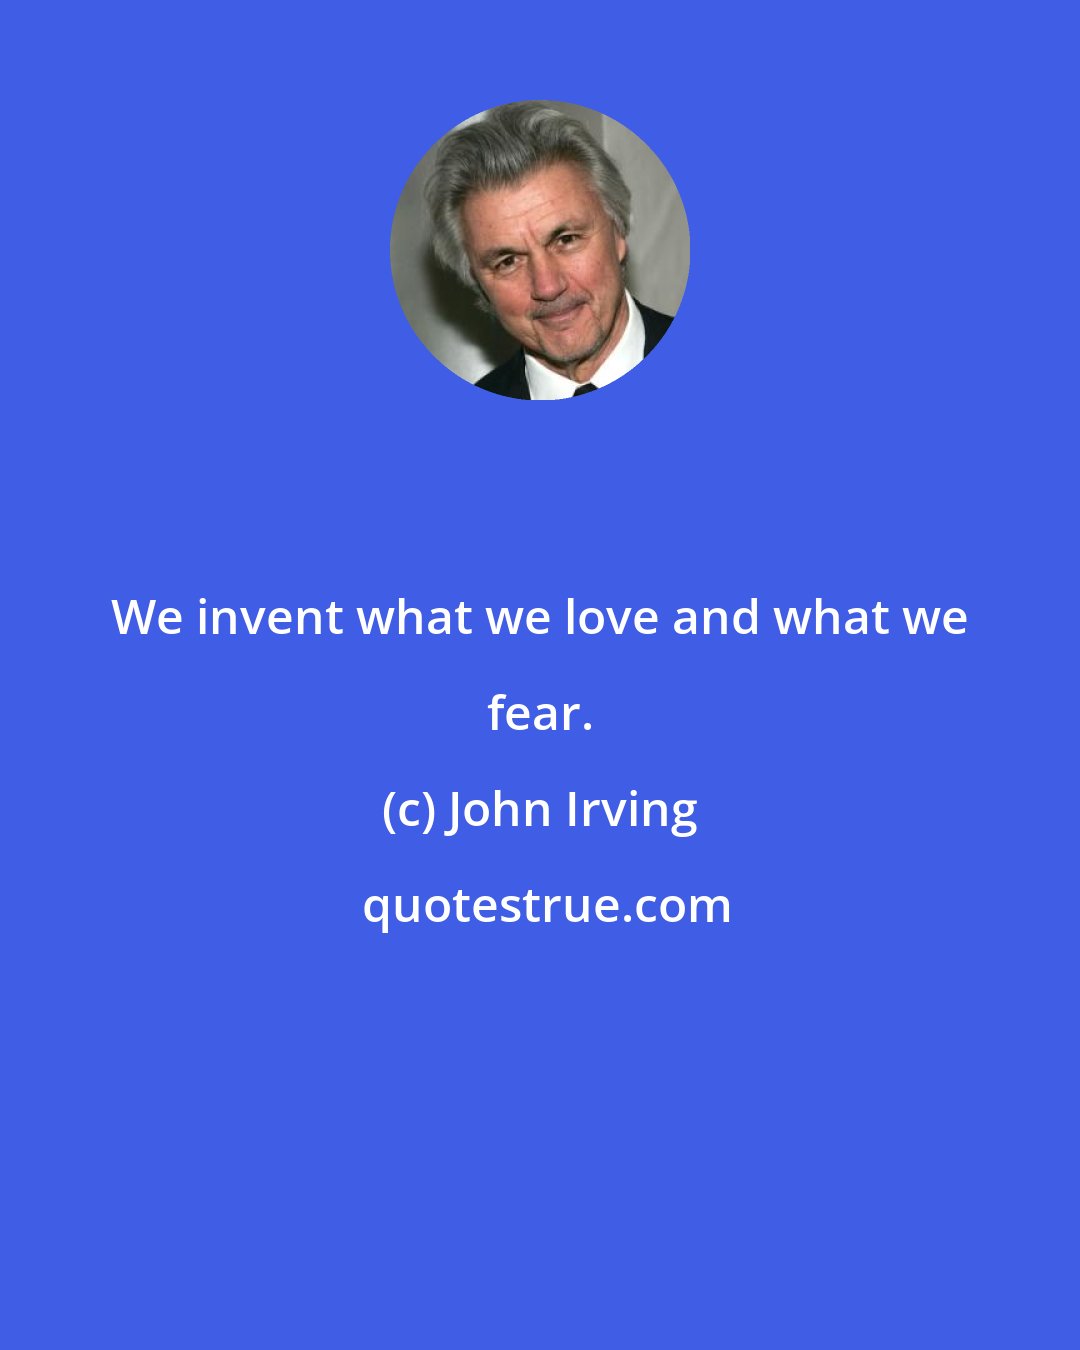 John Irving: We invent what we love and what we fear.